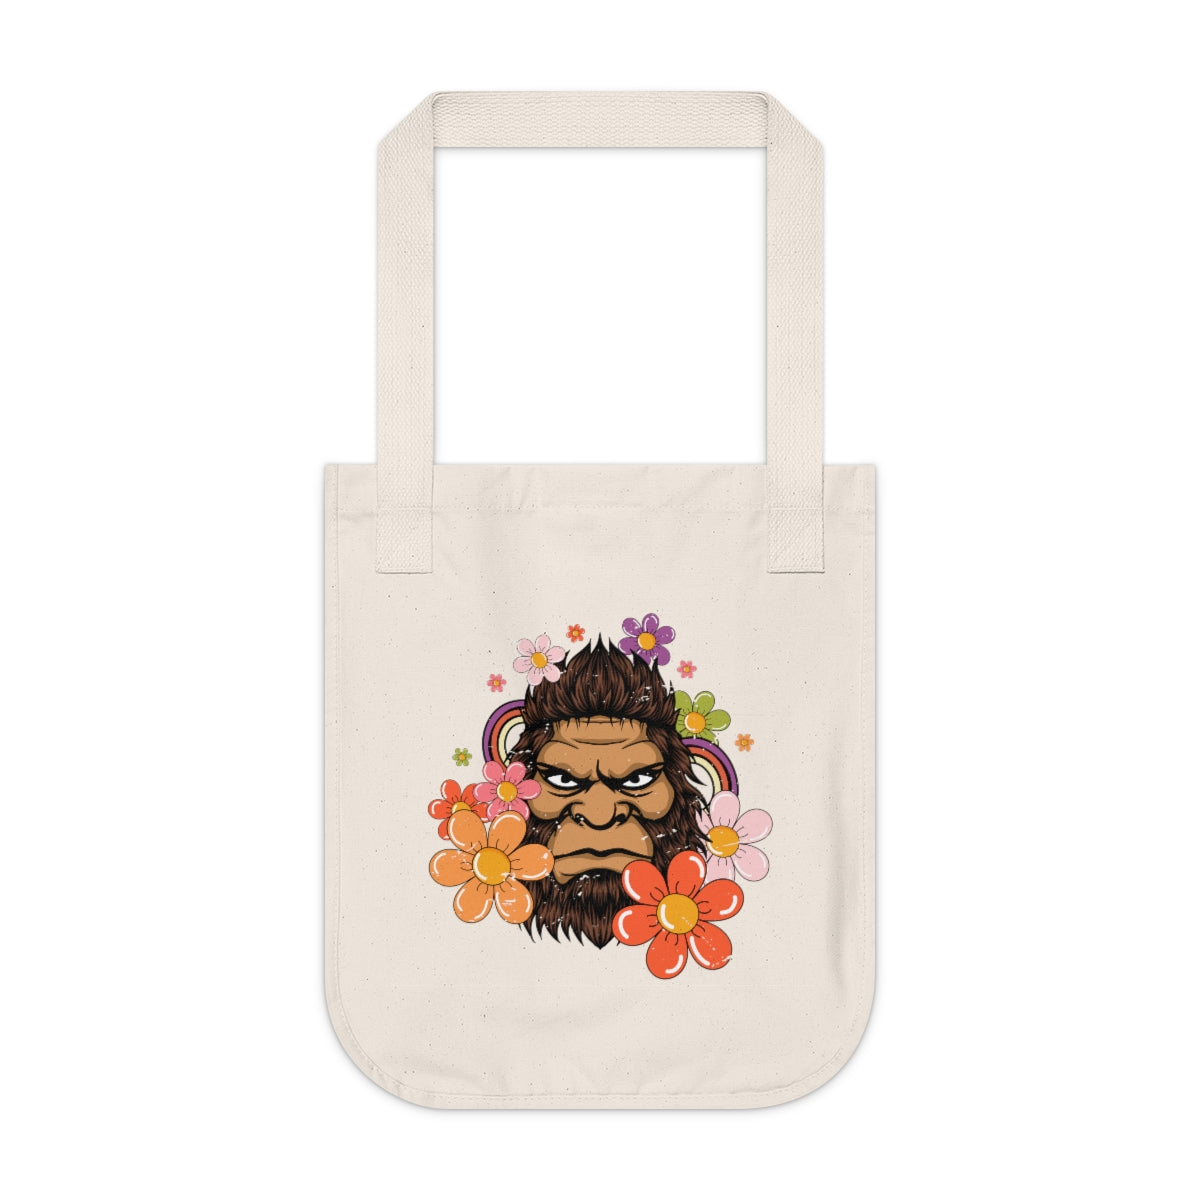 Retro 70s Floral Bigfoot Tote Bag | Funny Flower Power Tote | Organic Canvas Tote Bag